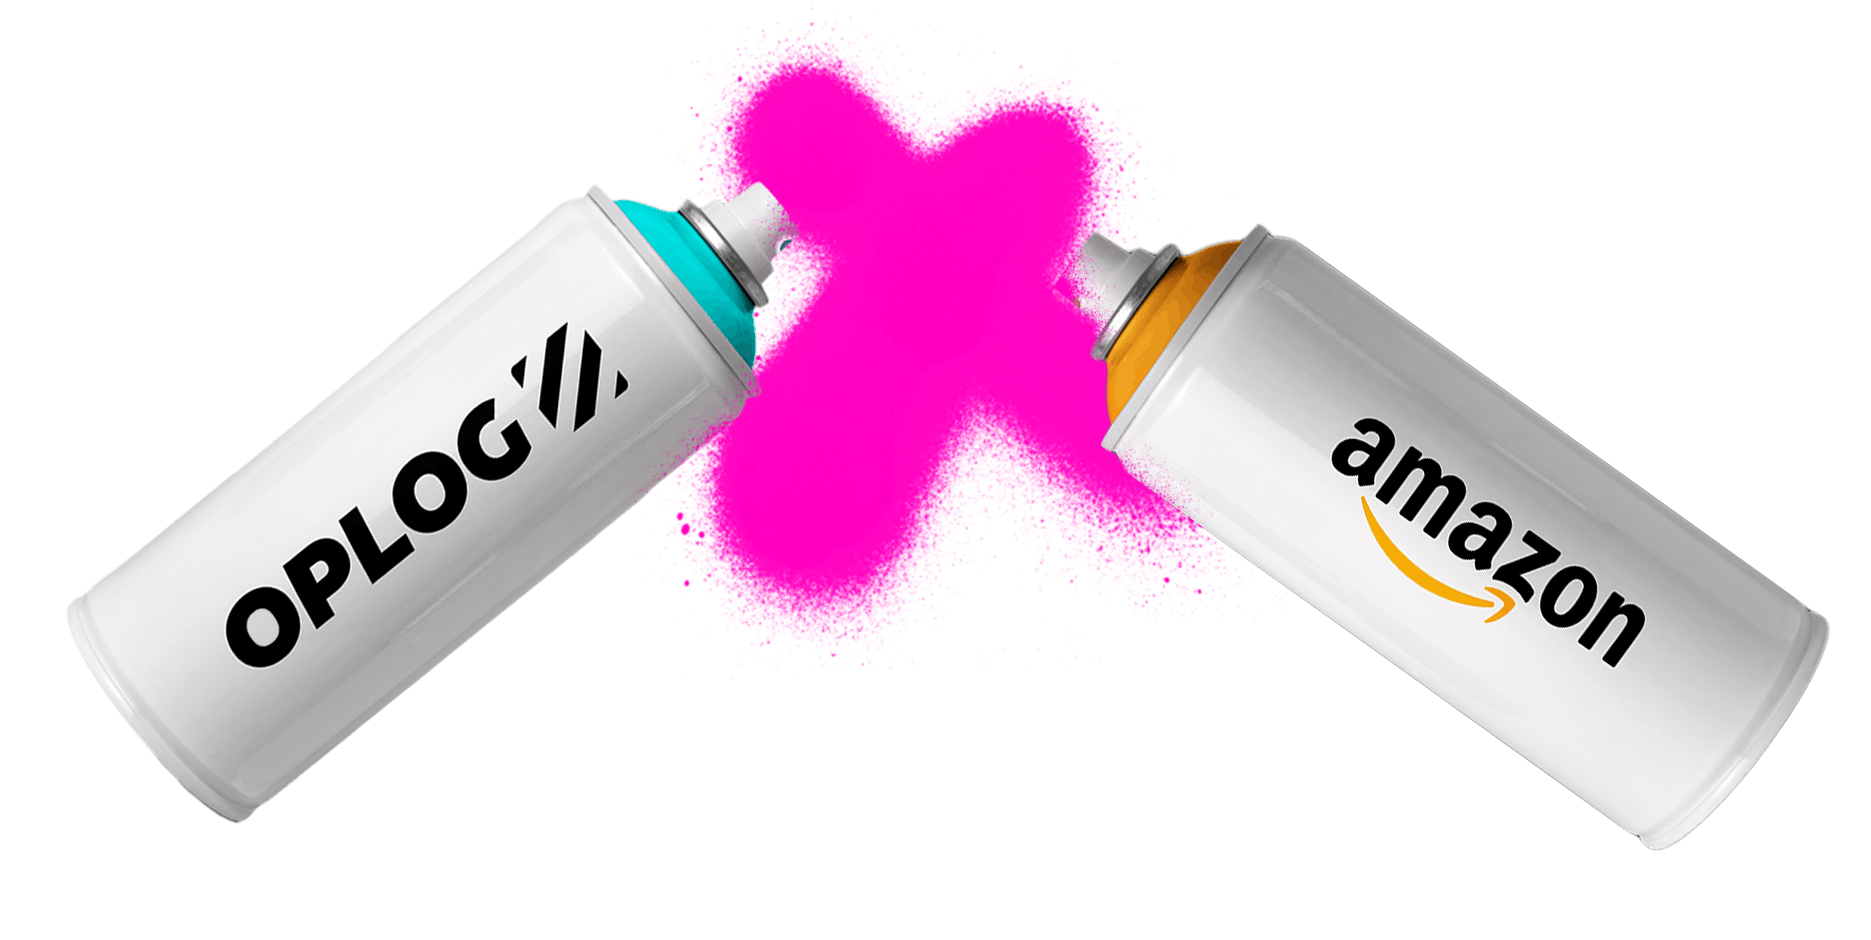 Spray bottles image with OPLOG logo on one side and Amazon logo on the other side.